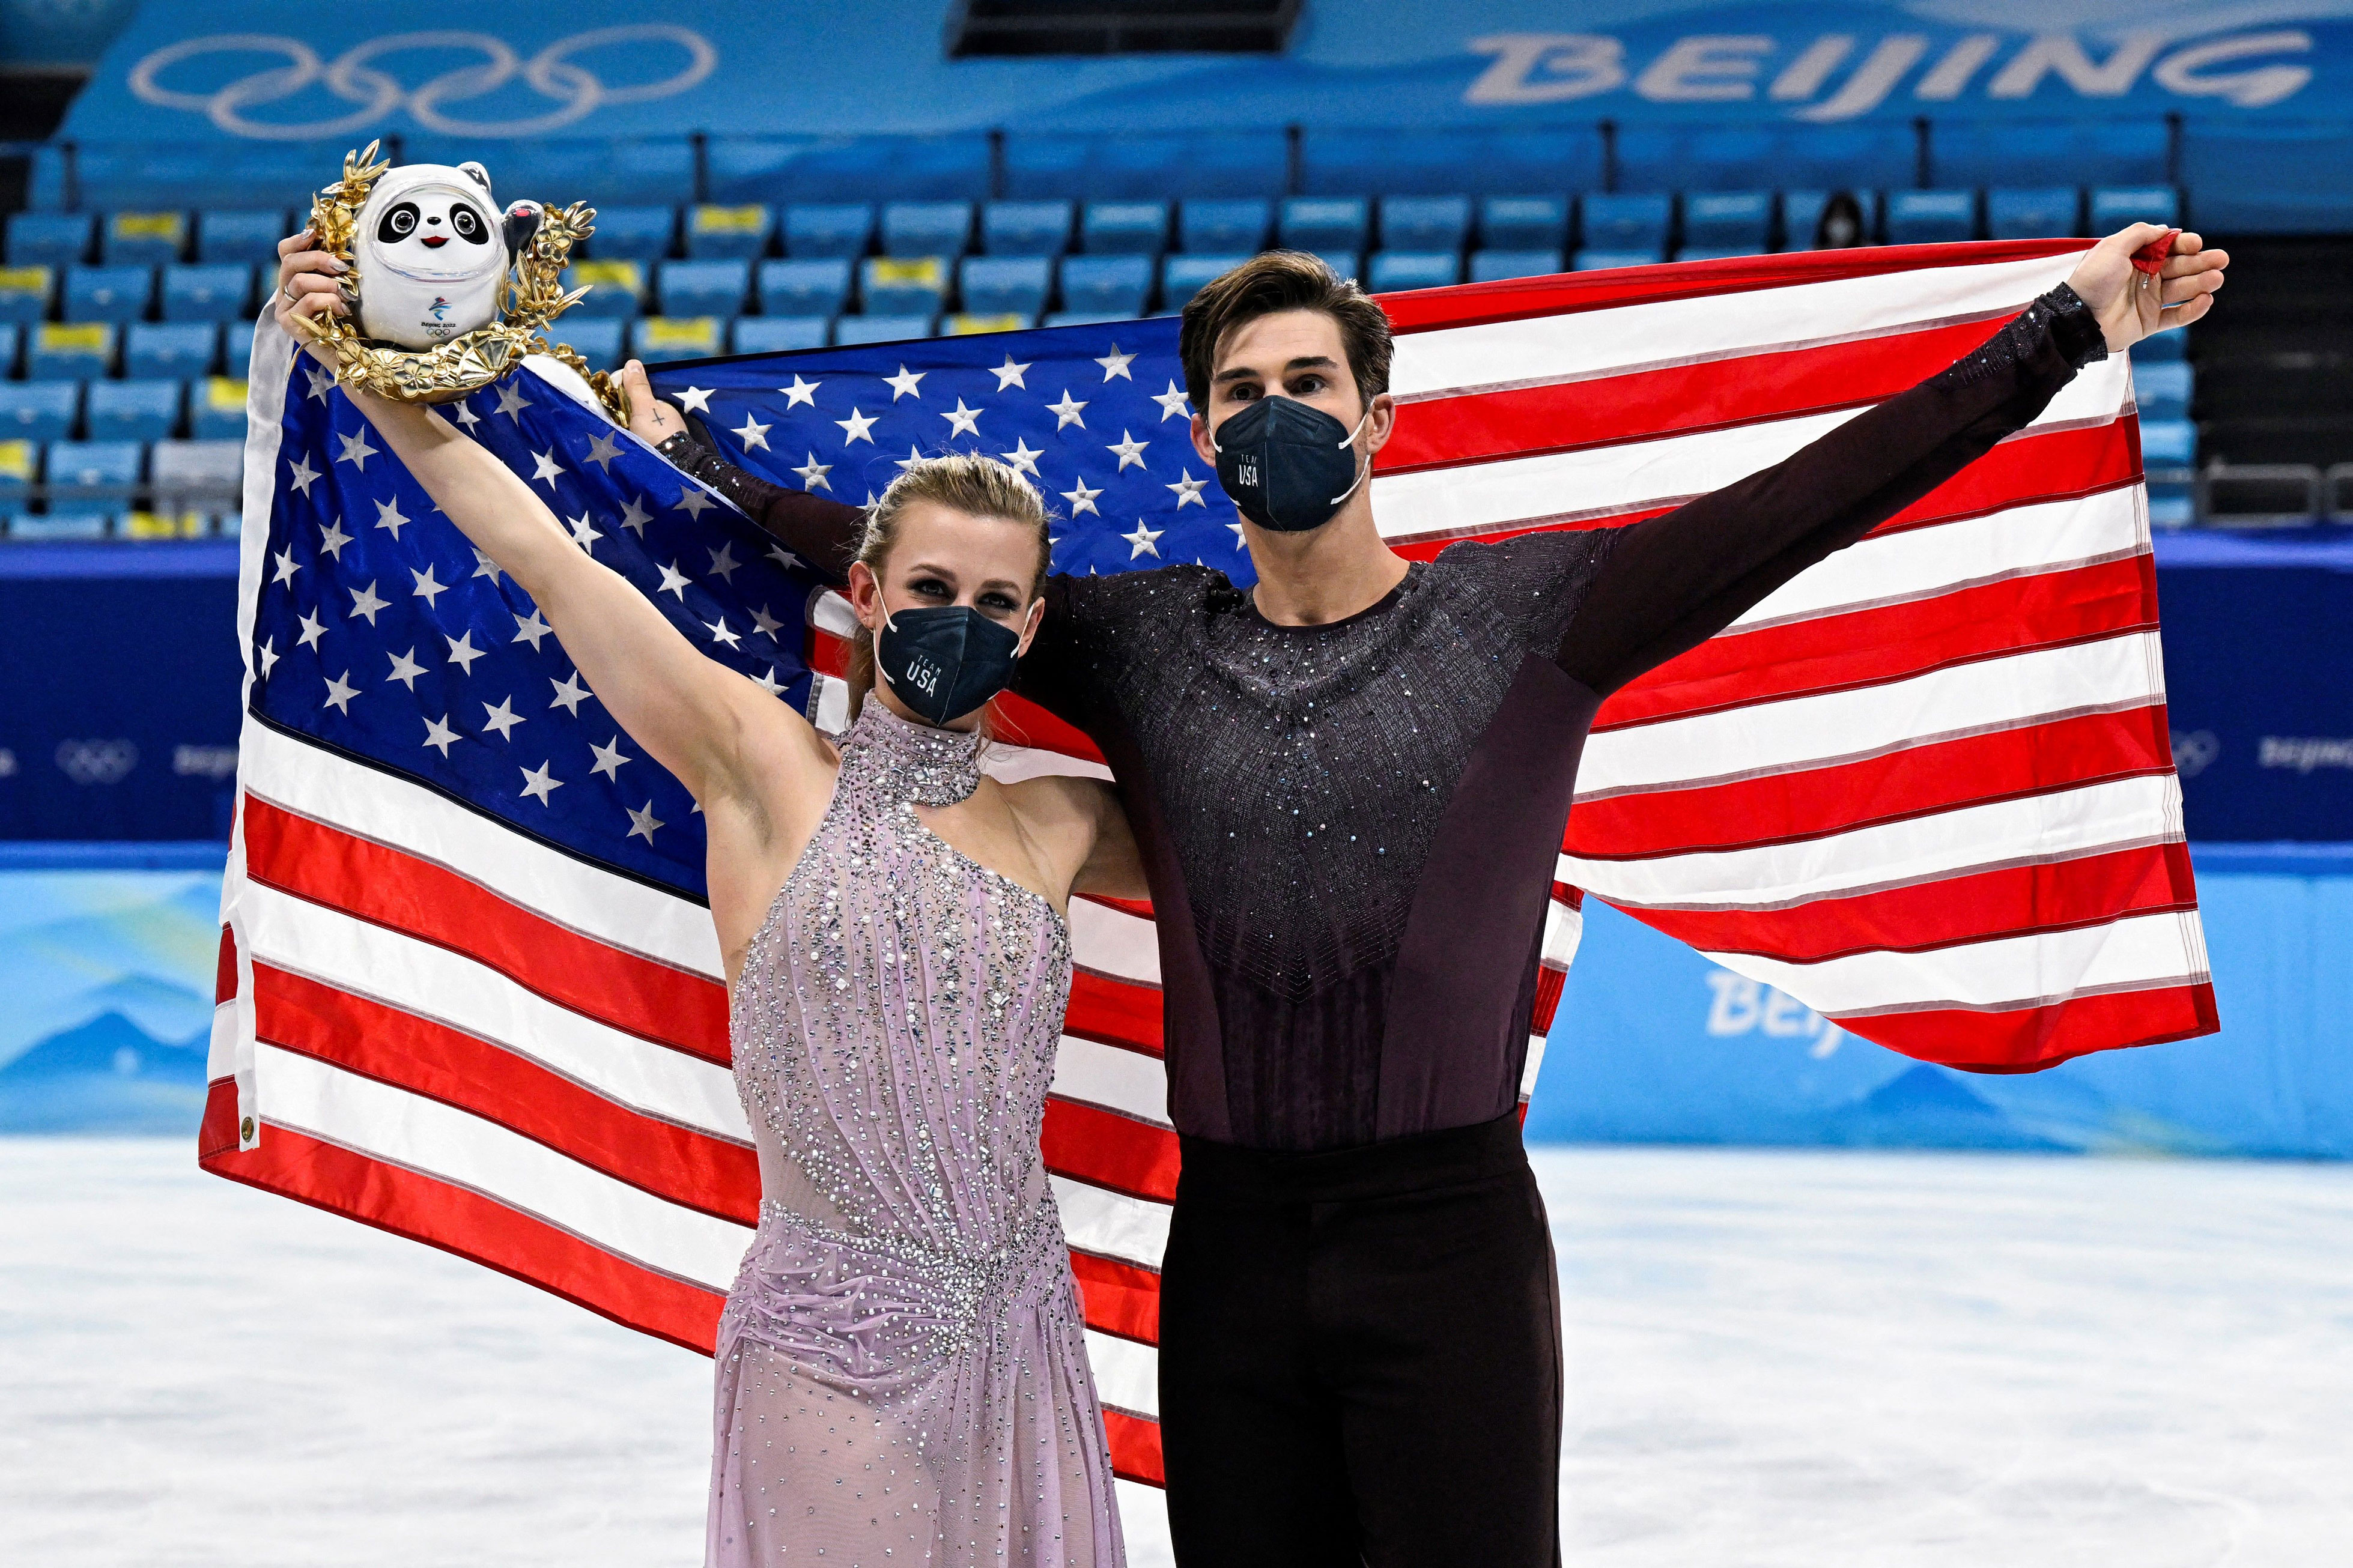 Madison Hubbell and Zachary Donohue celebrate during the ice dance figure skating event on Monday.